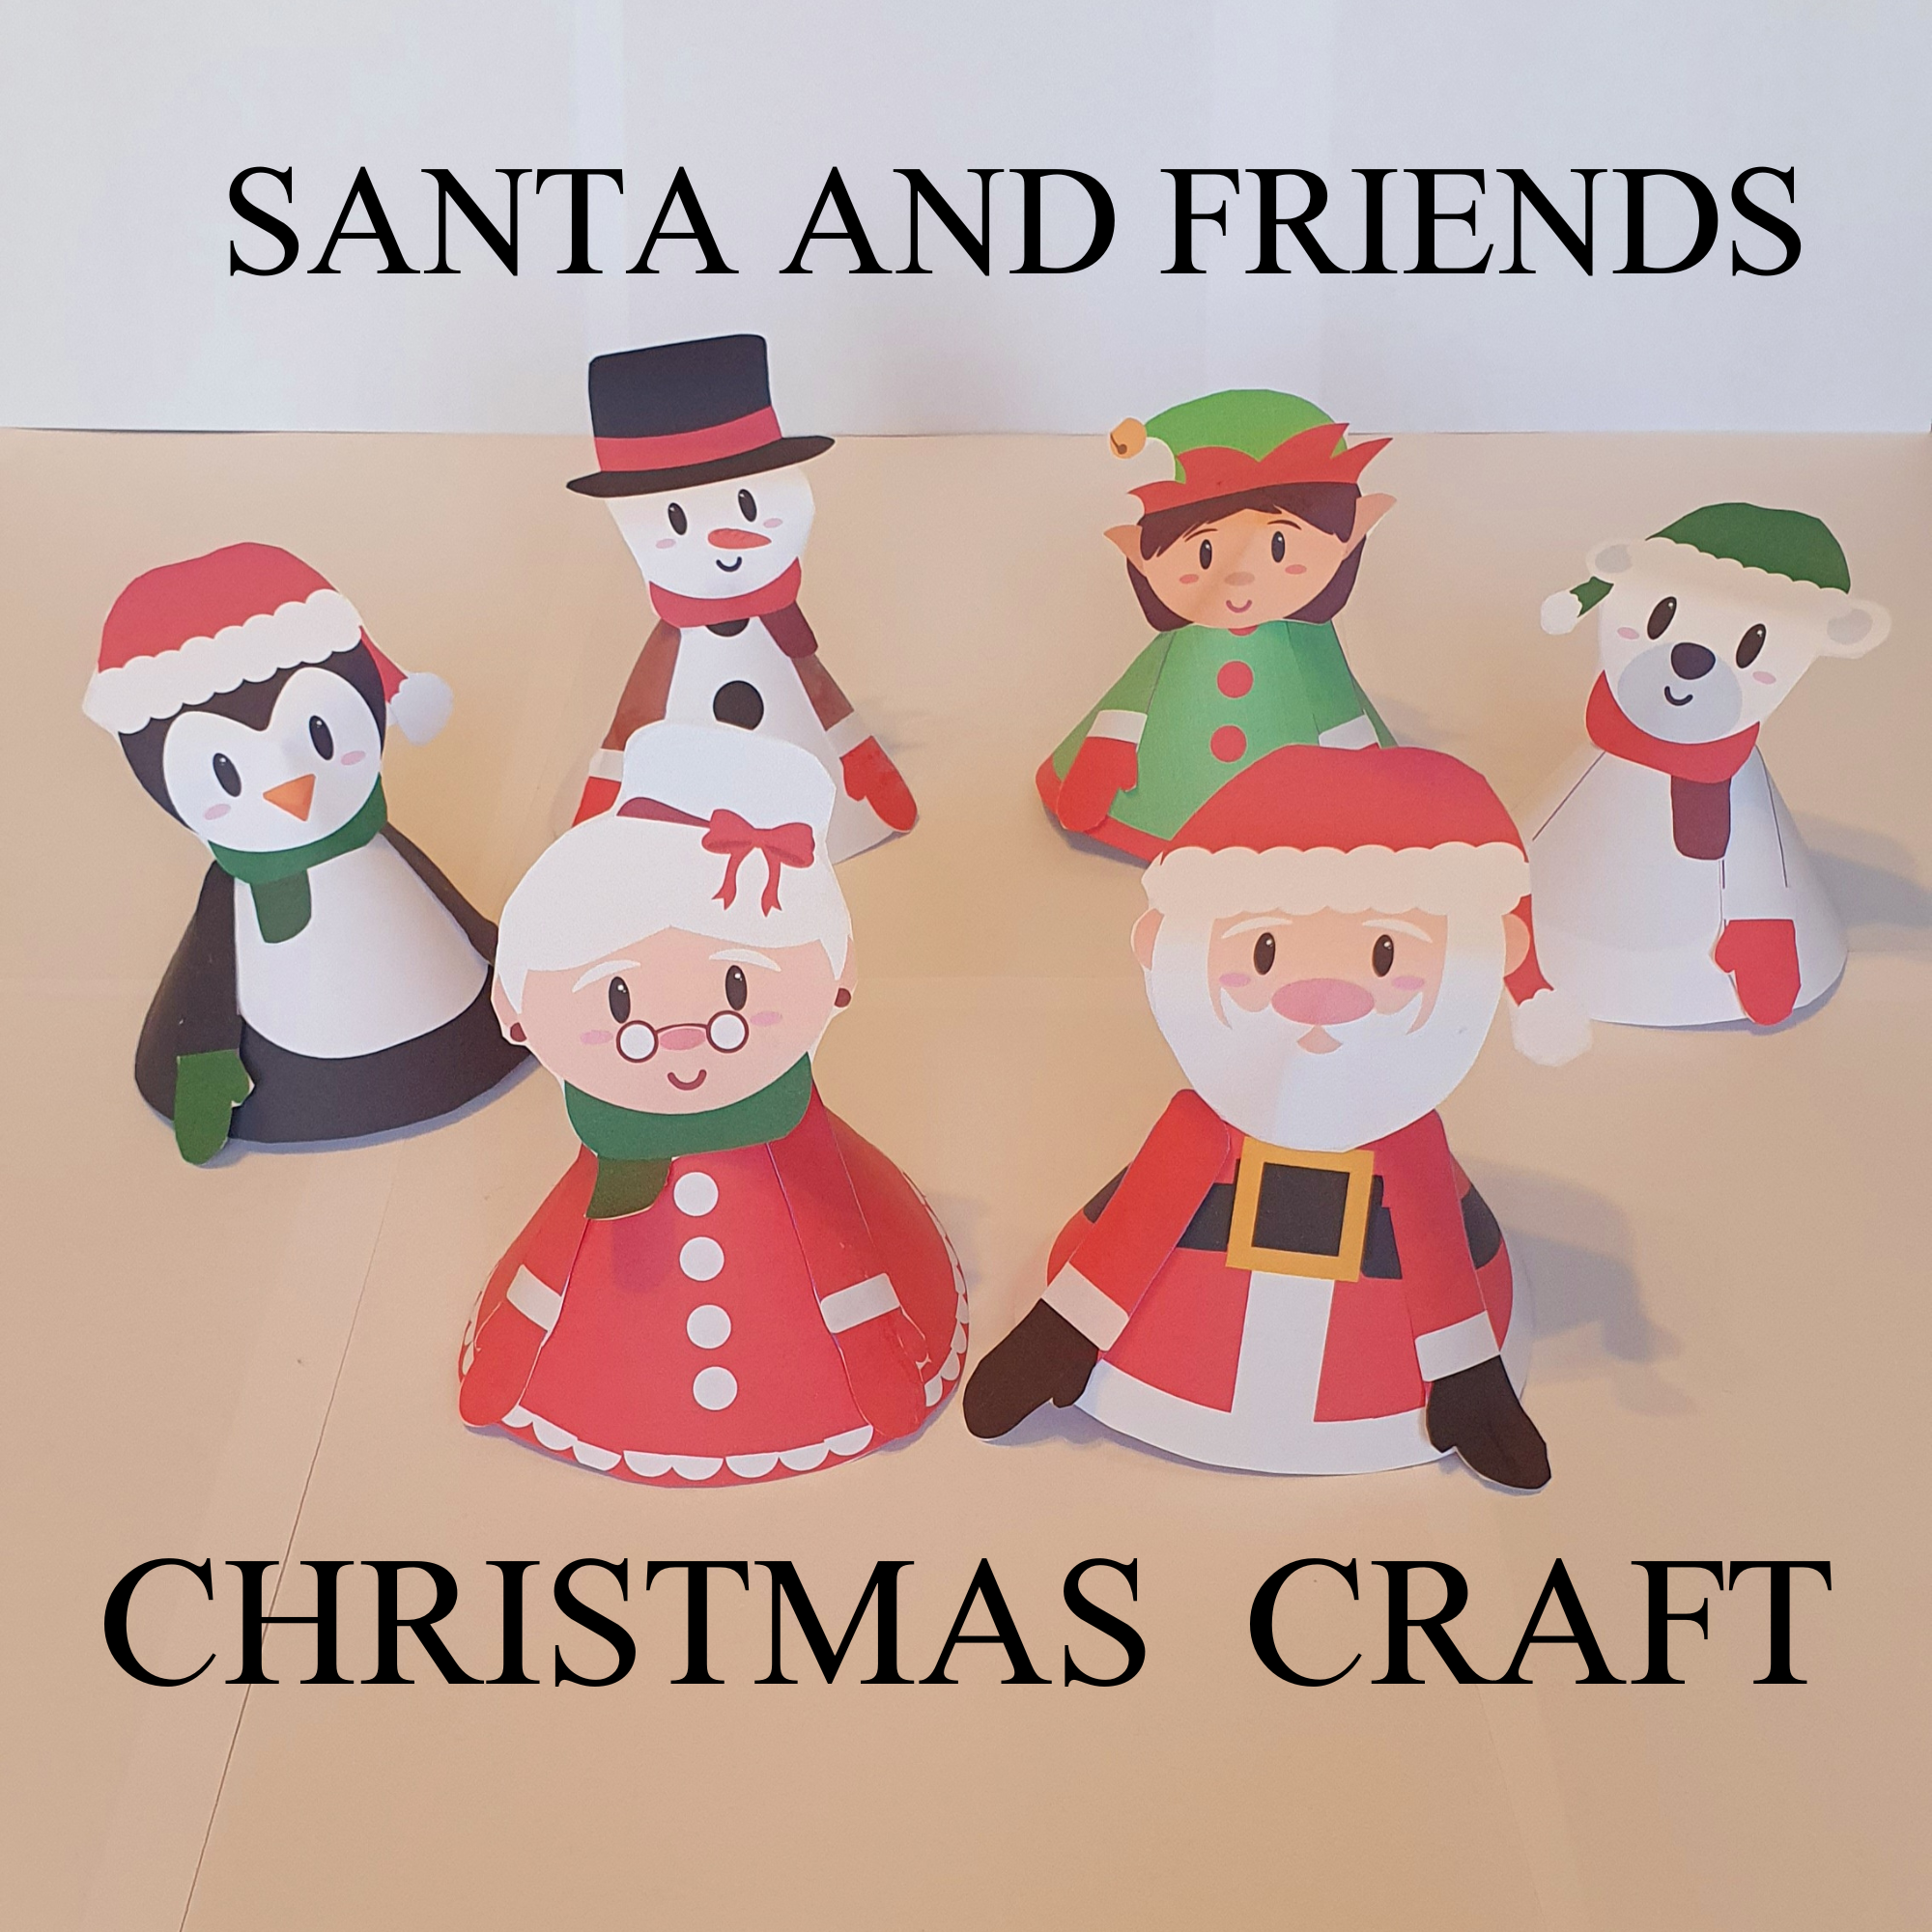 How to make a Santa and friends Christmas paper craft